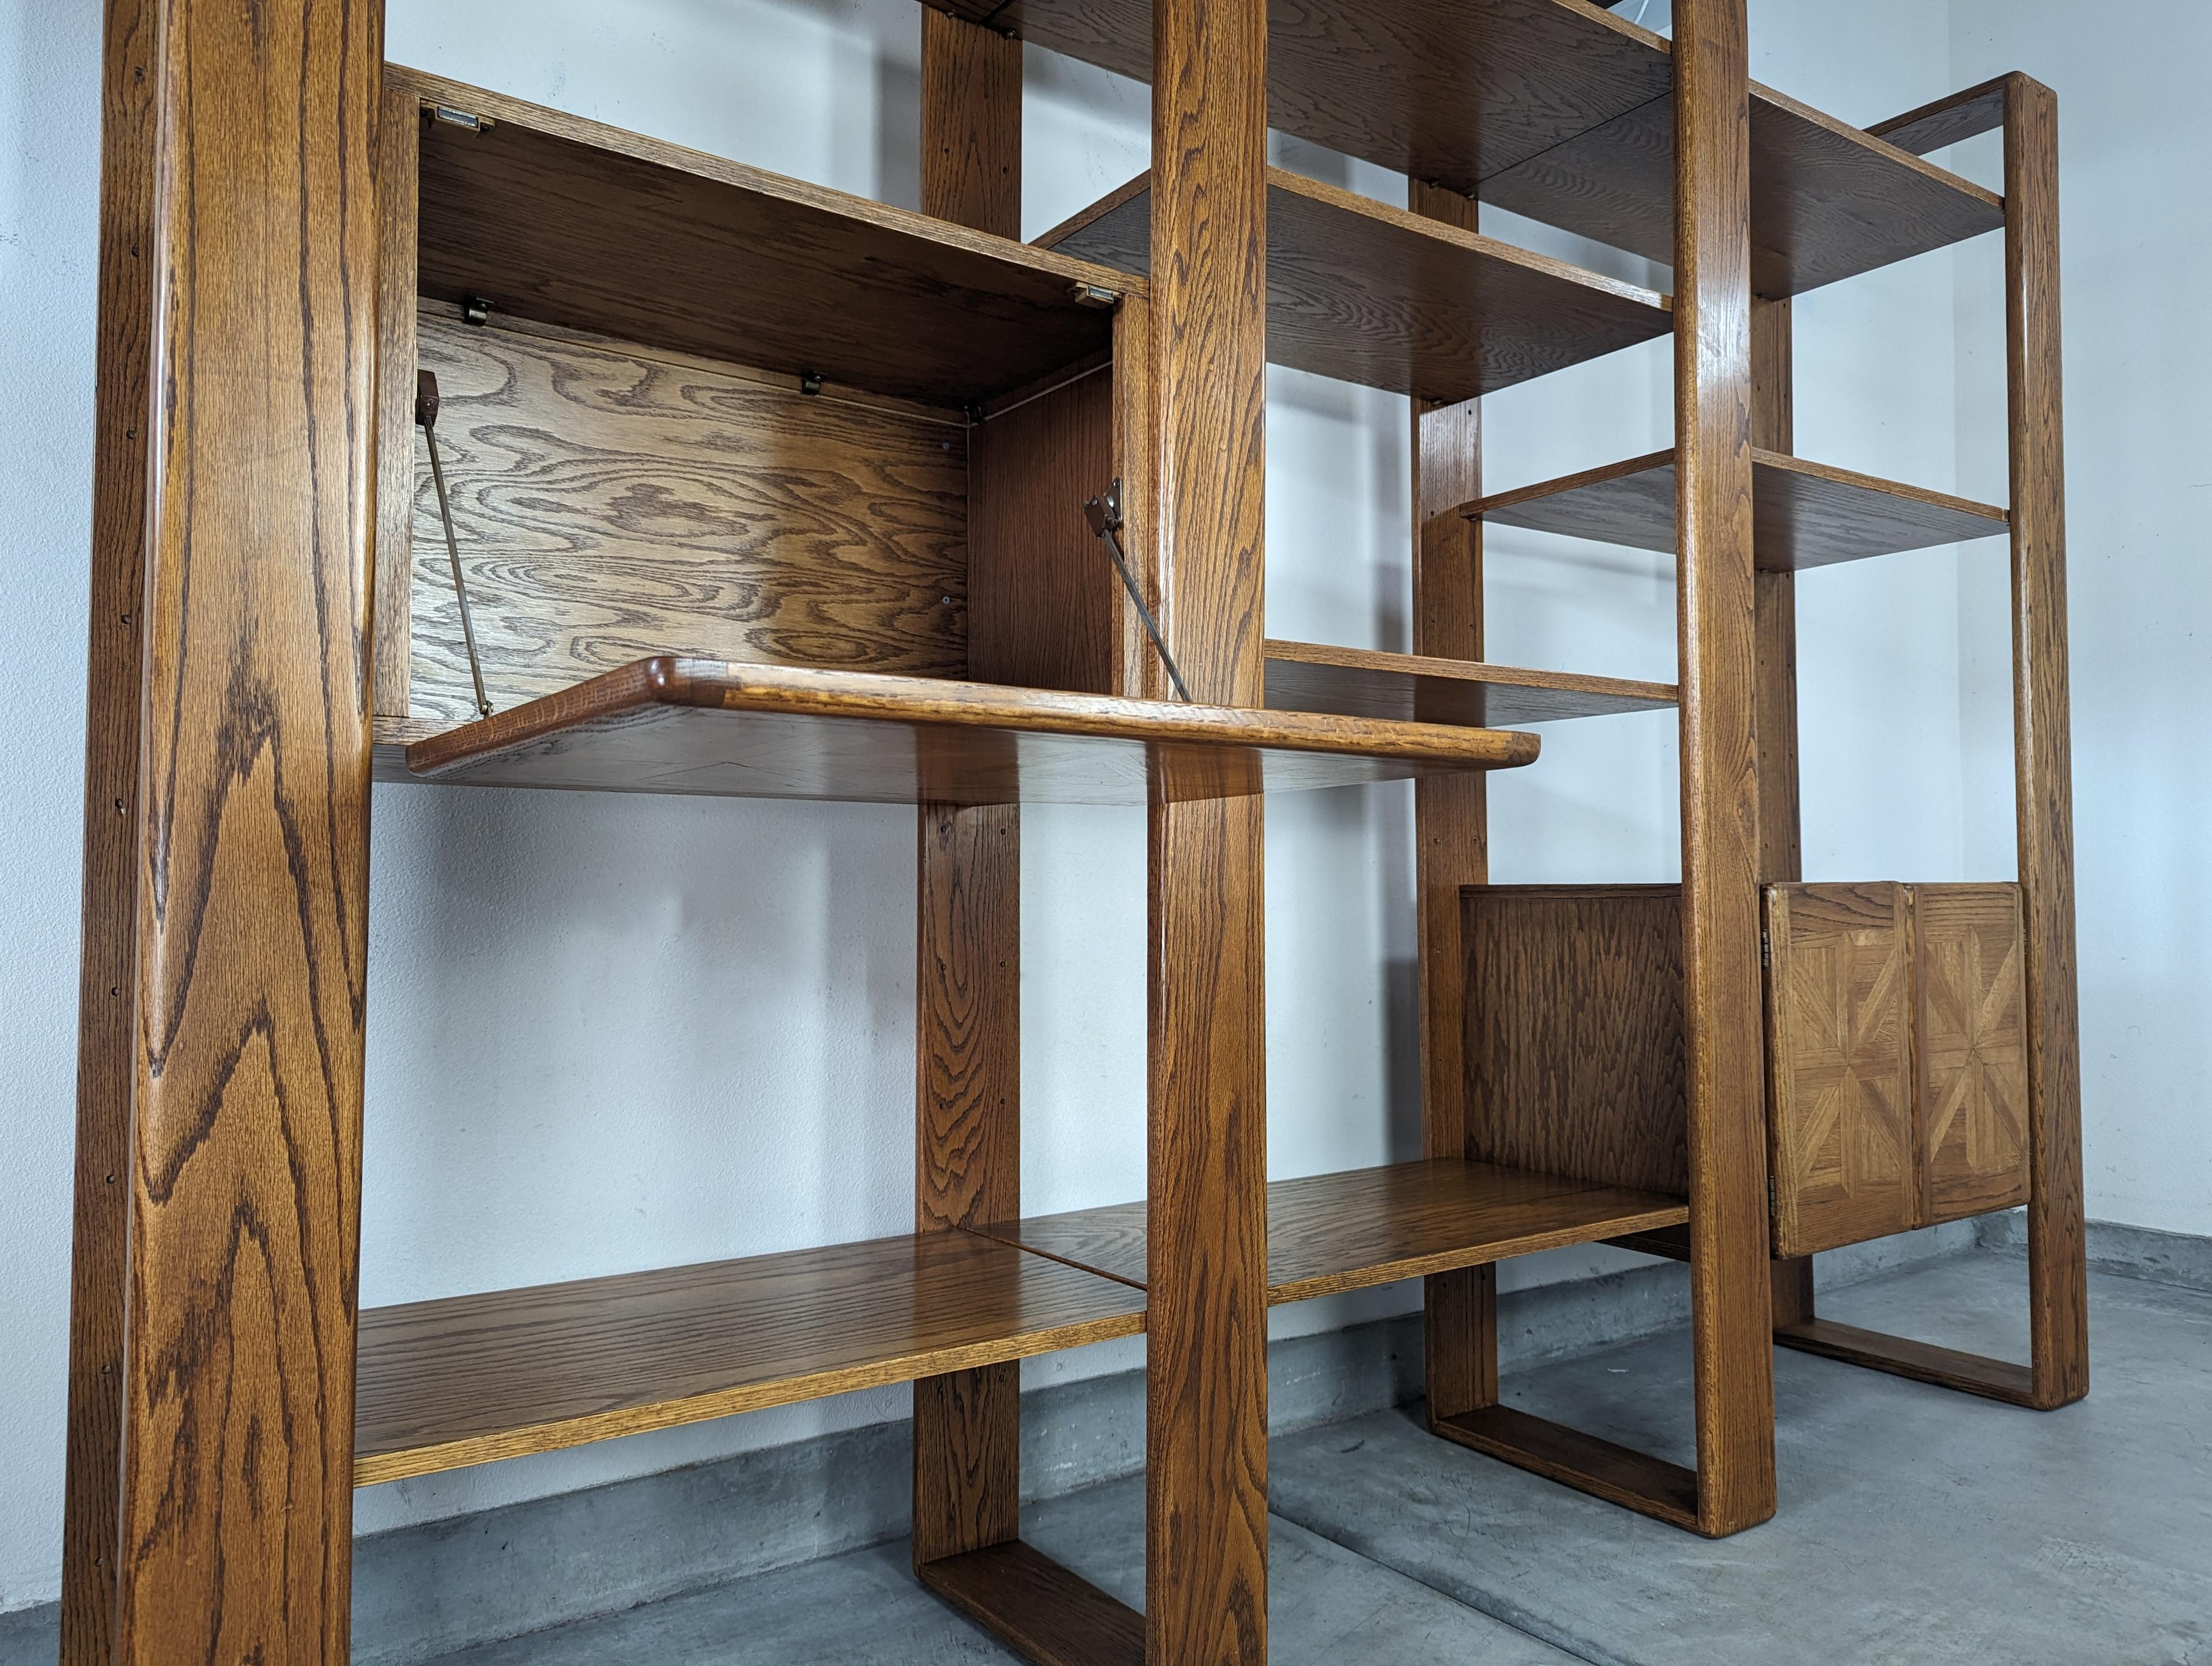 Late 20th Century Cerused Oak Modular Wall Unit Shelving or Room Divider by Lou Hodges, c1970s For Sale